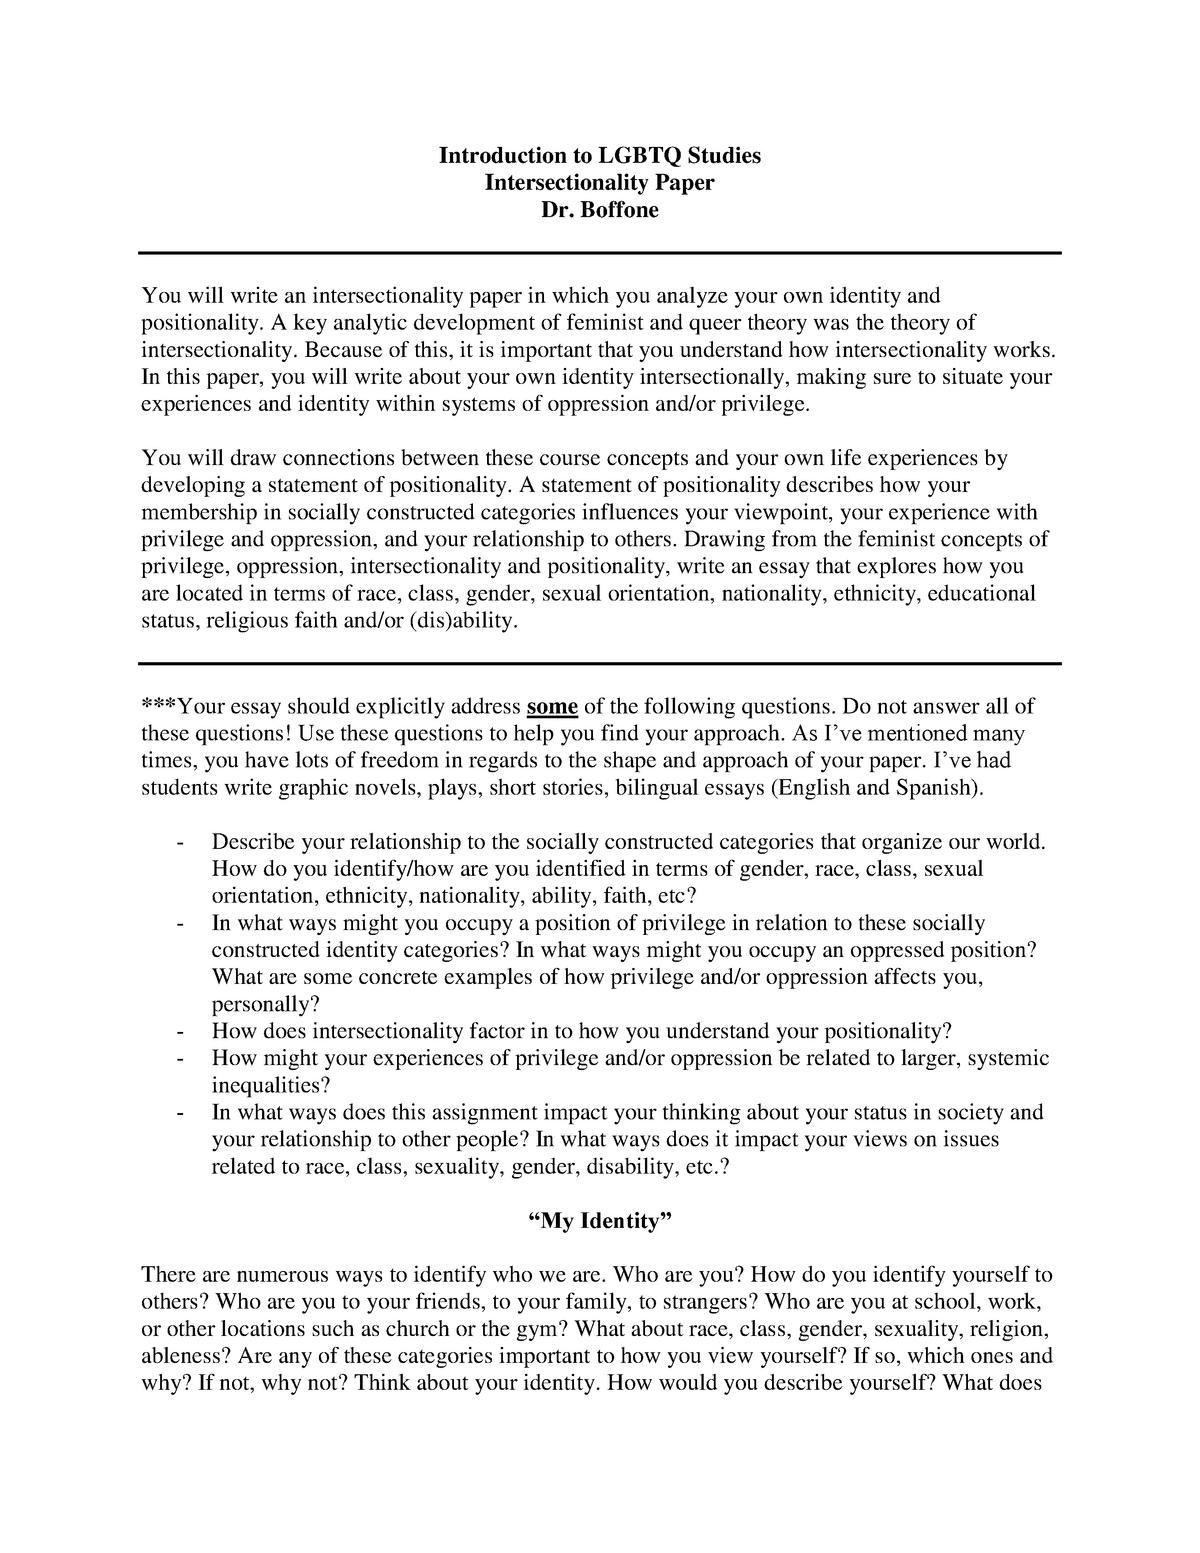 Intersectionality Paper Prompt - WGSS 24 - Introduction to GLBT